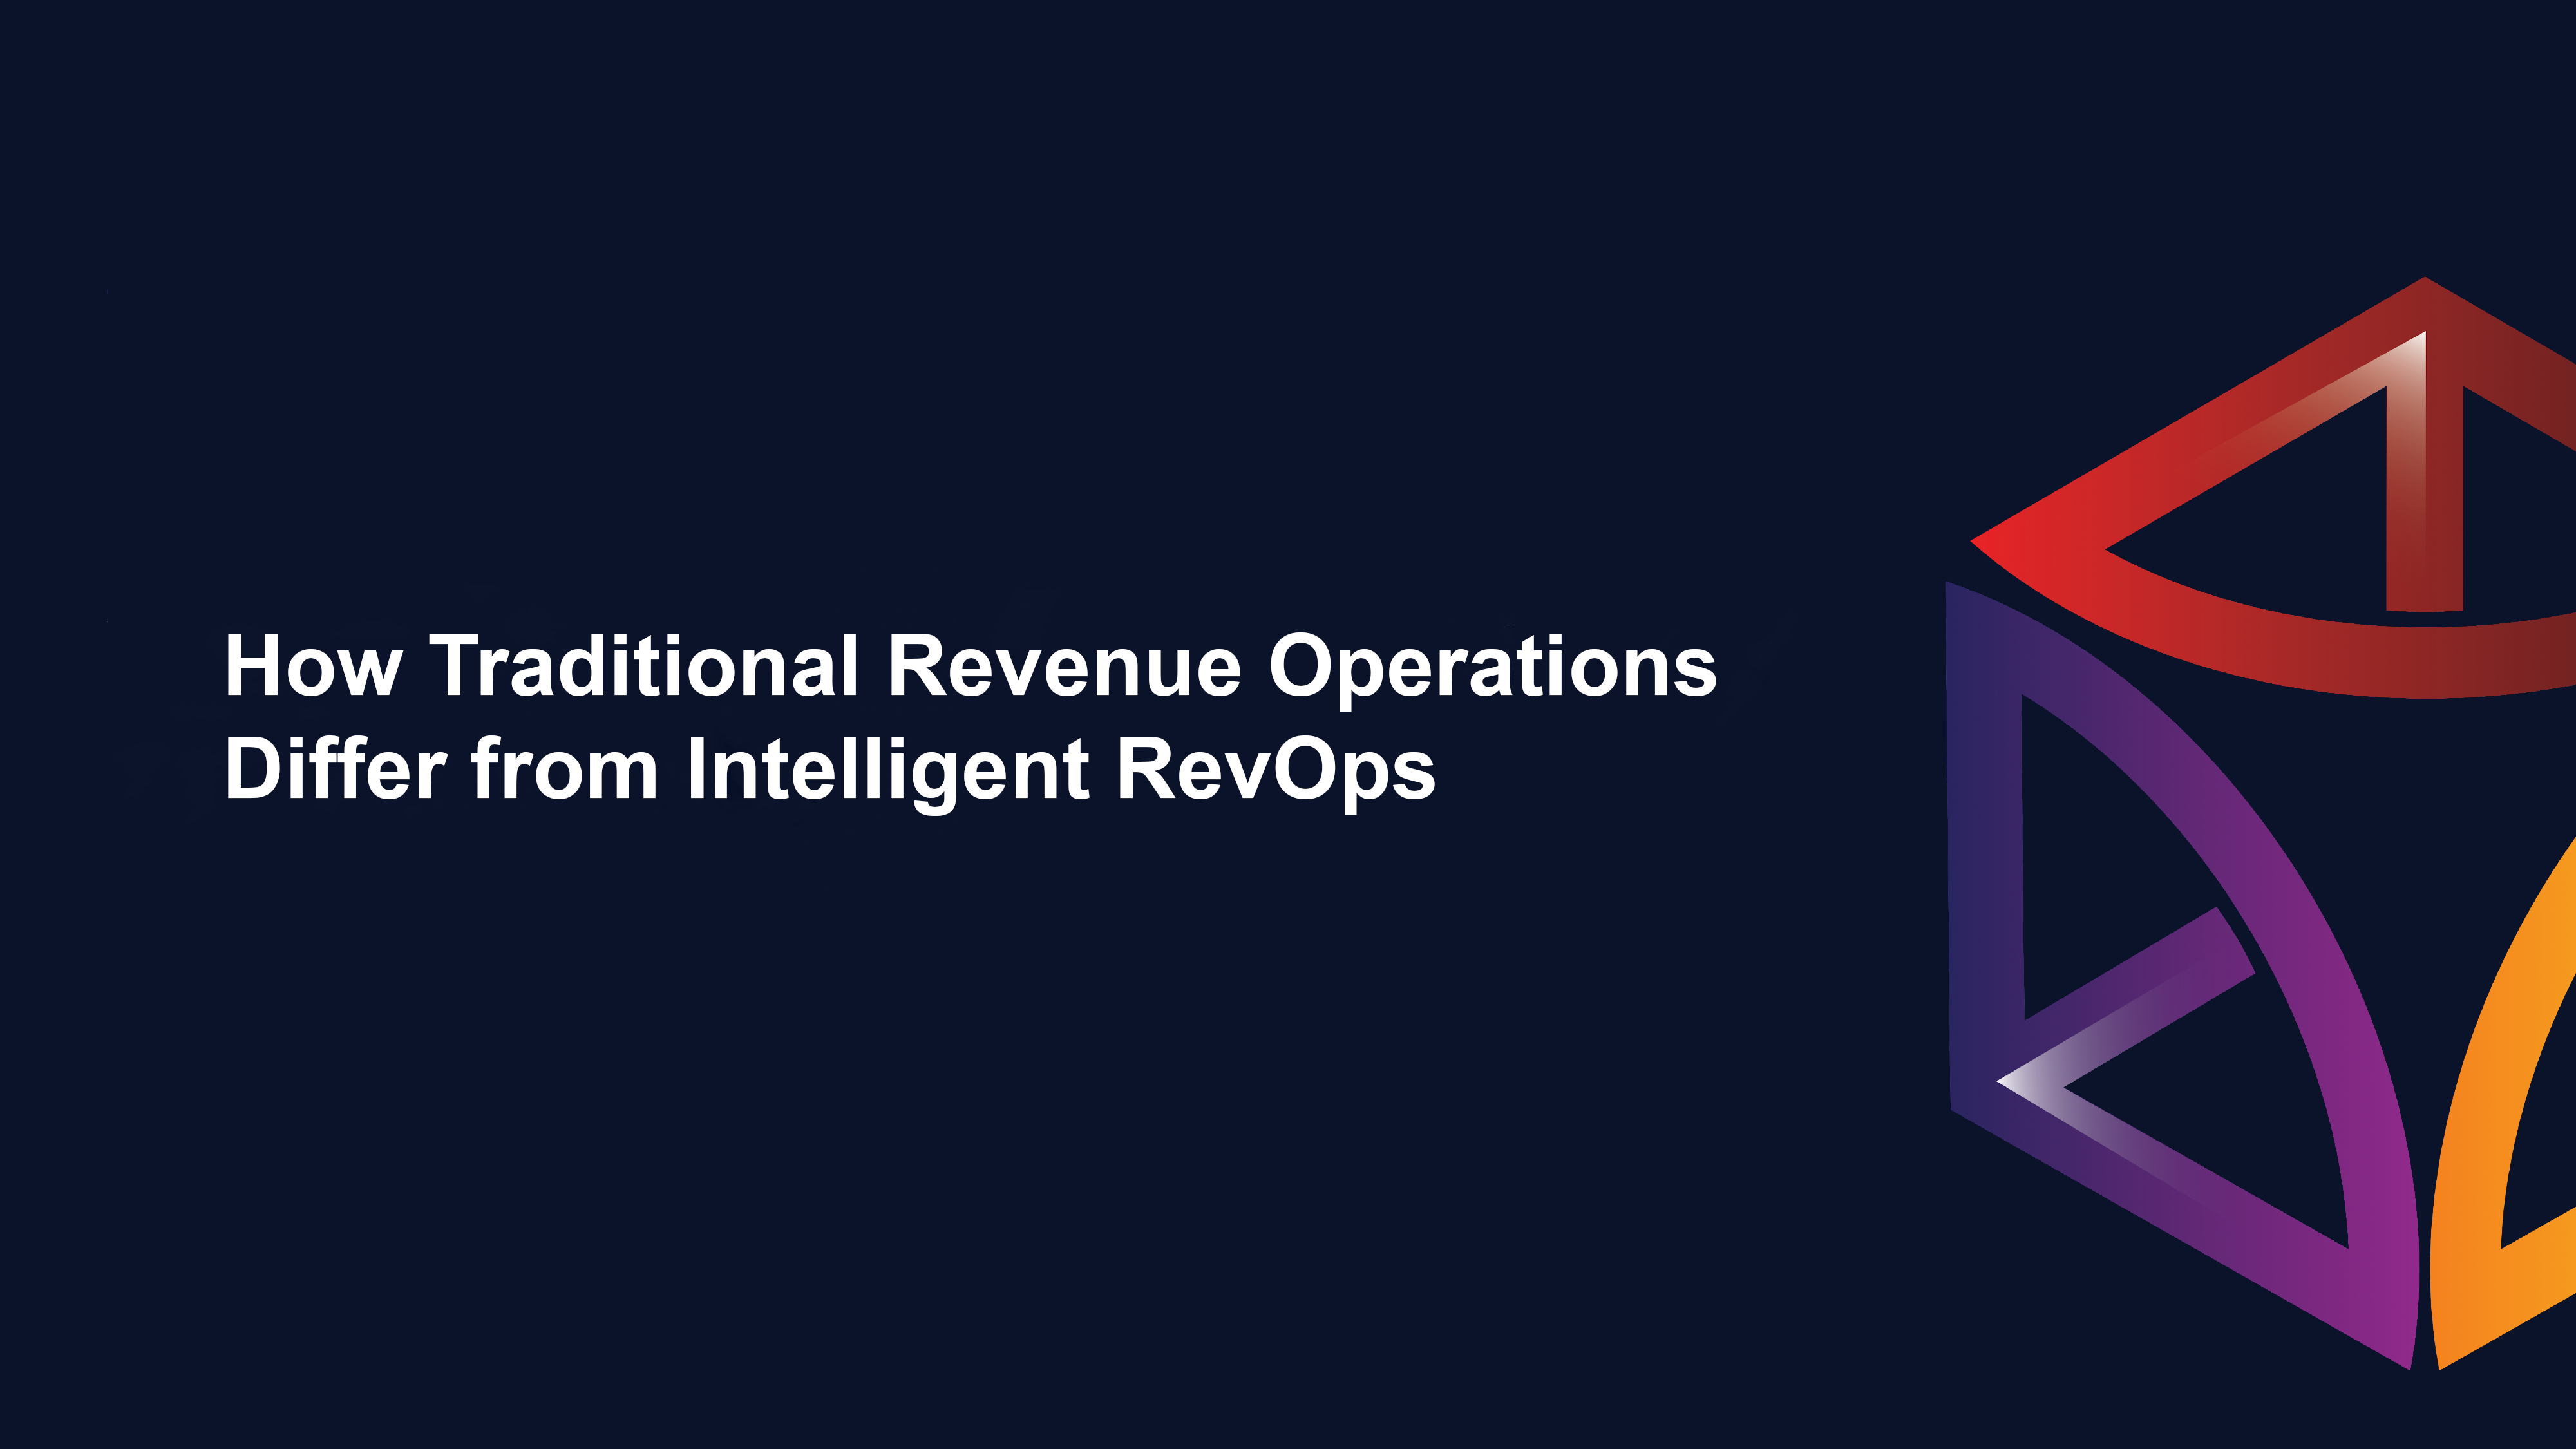 How Traditional Revenue Operations Differ from Intelligent RevOps